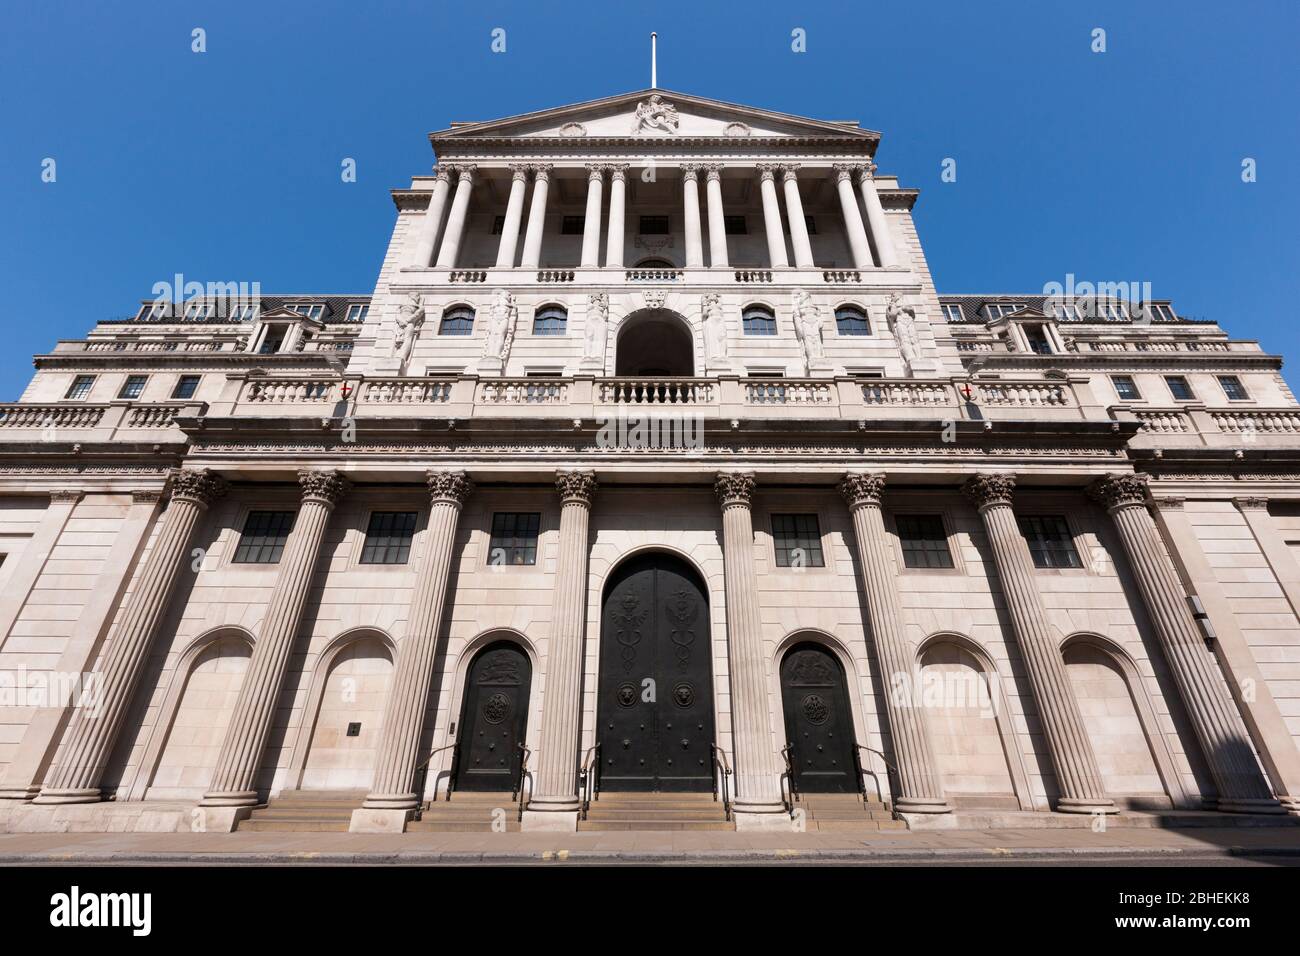 War memorial for service men and women who fell during the first and second world Wars outside and showing the front facade of the Bank of England building on Threadneedle St, London, EC2R 8AH. The bank controls interest rates for the UK. (118) Stock Photo